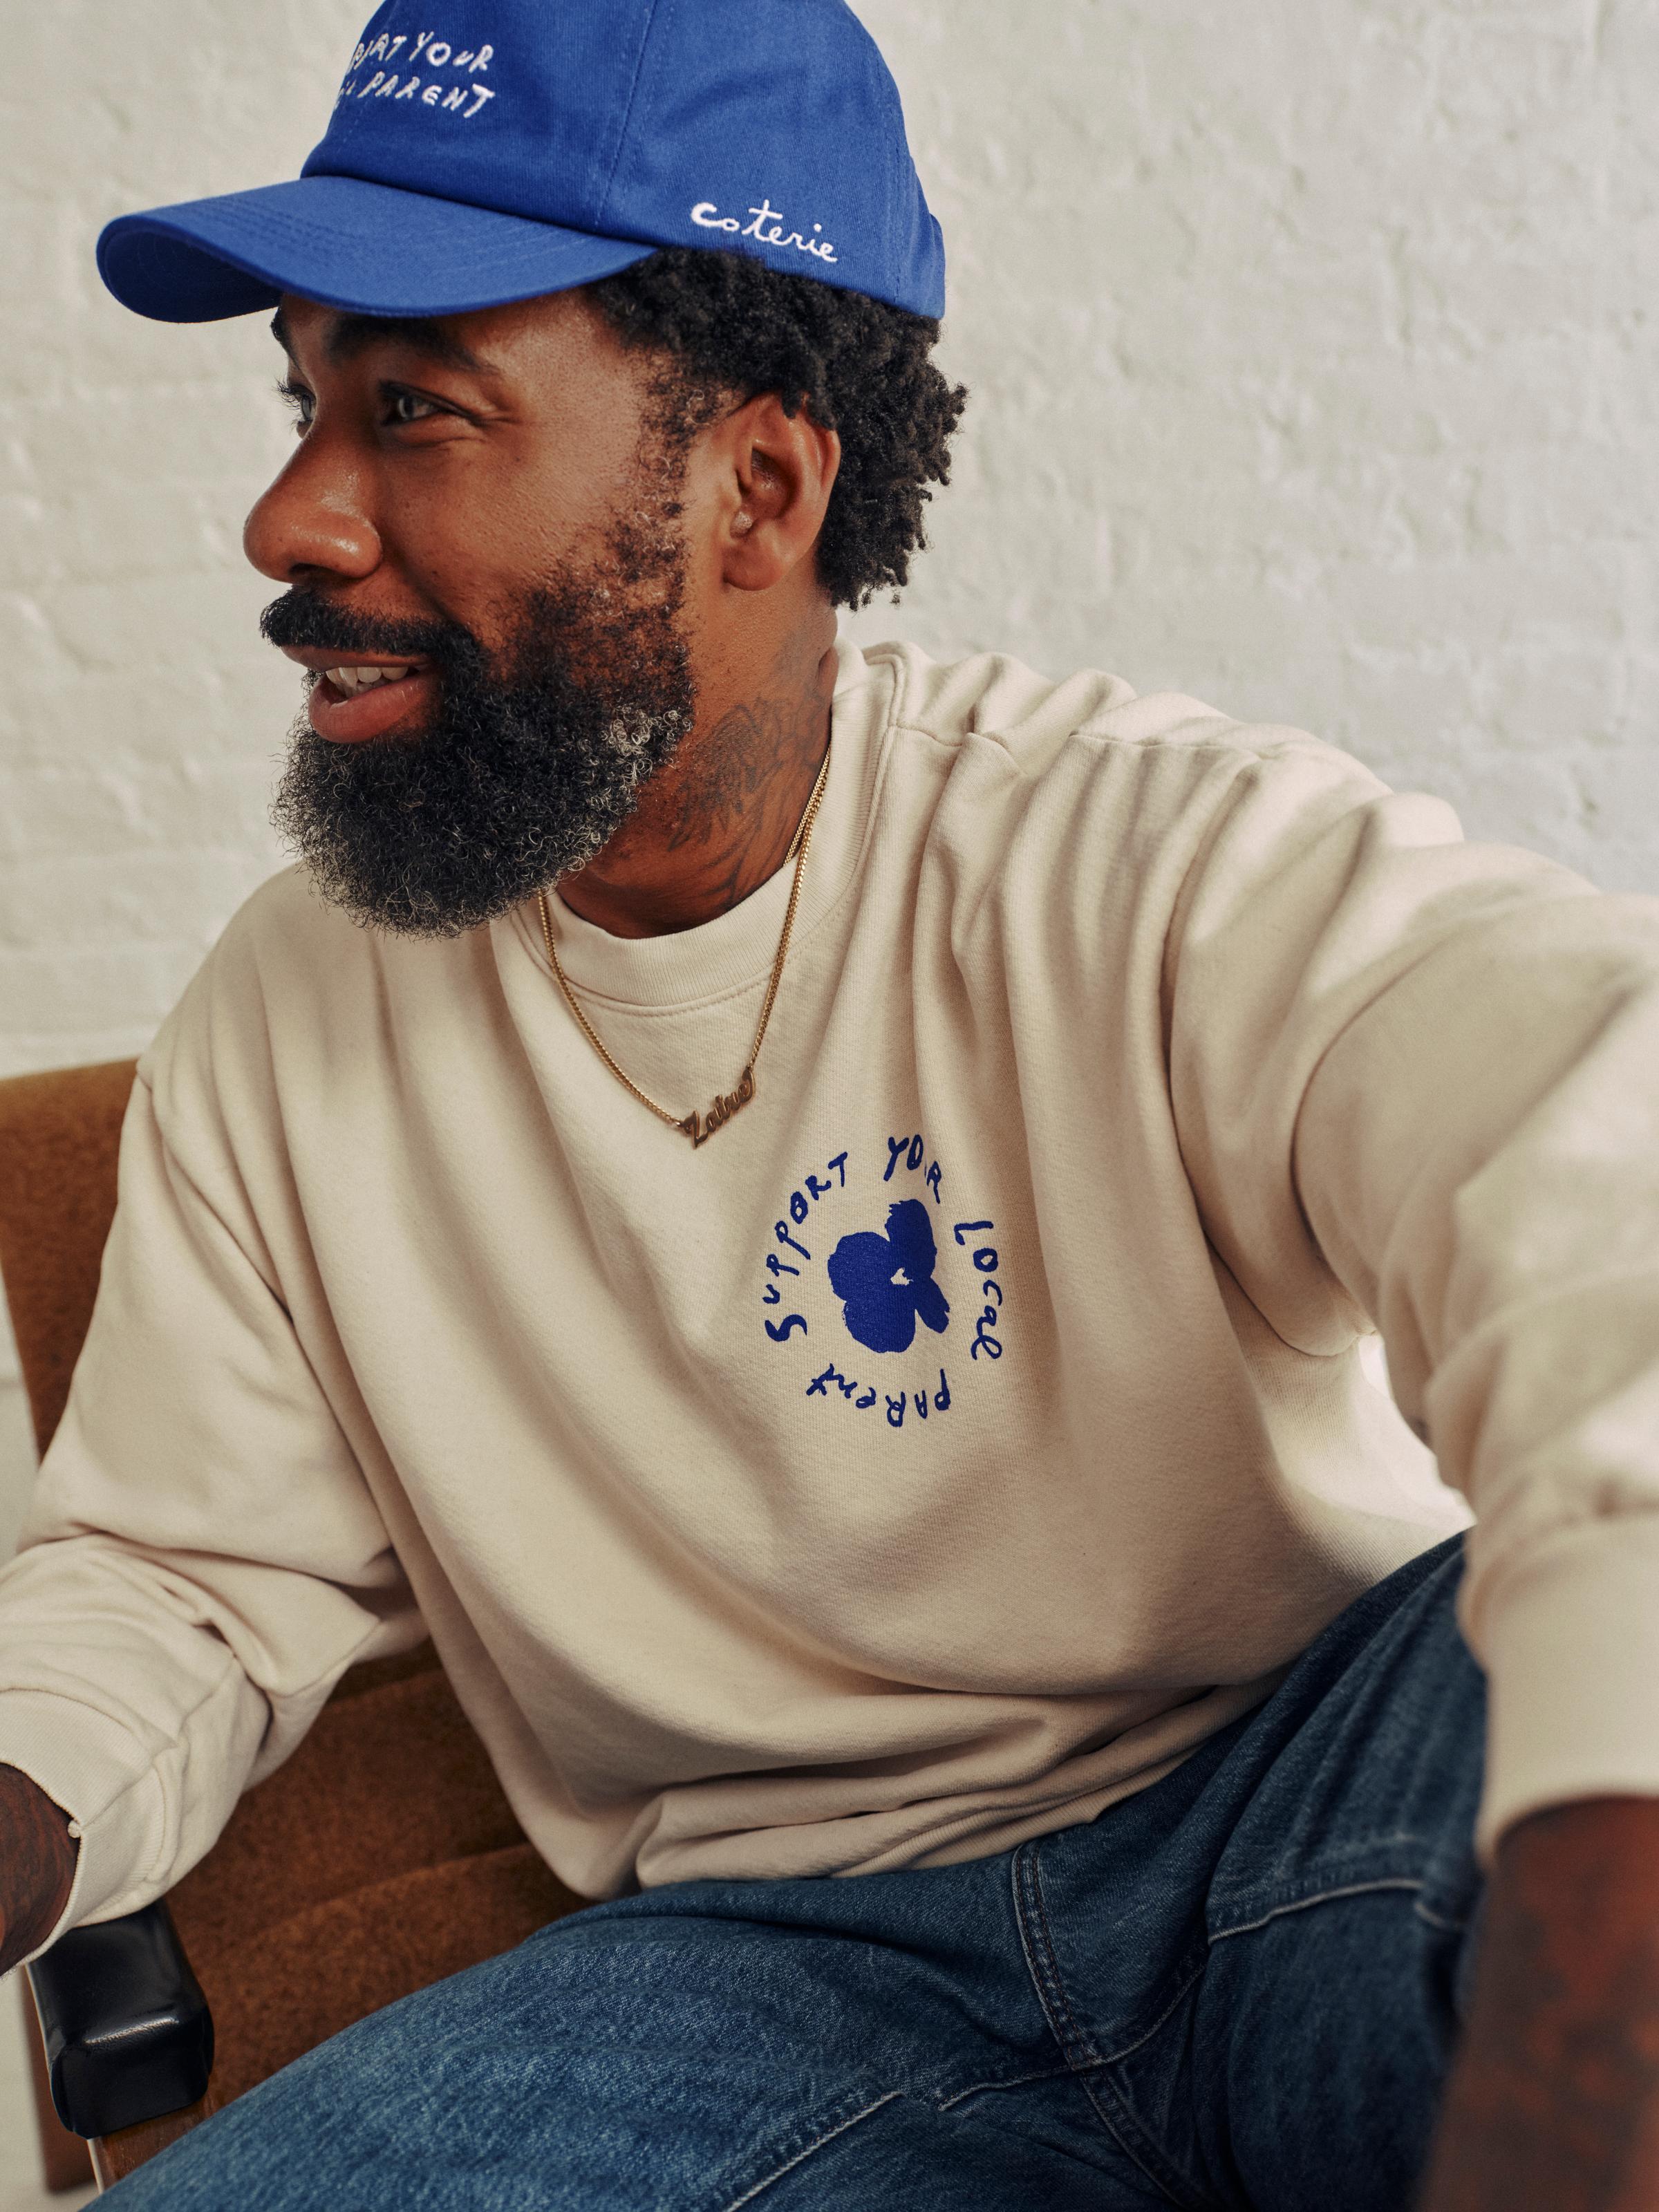 Rodney wearing the SYLP classic cap and crewneck.